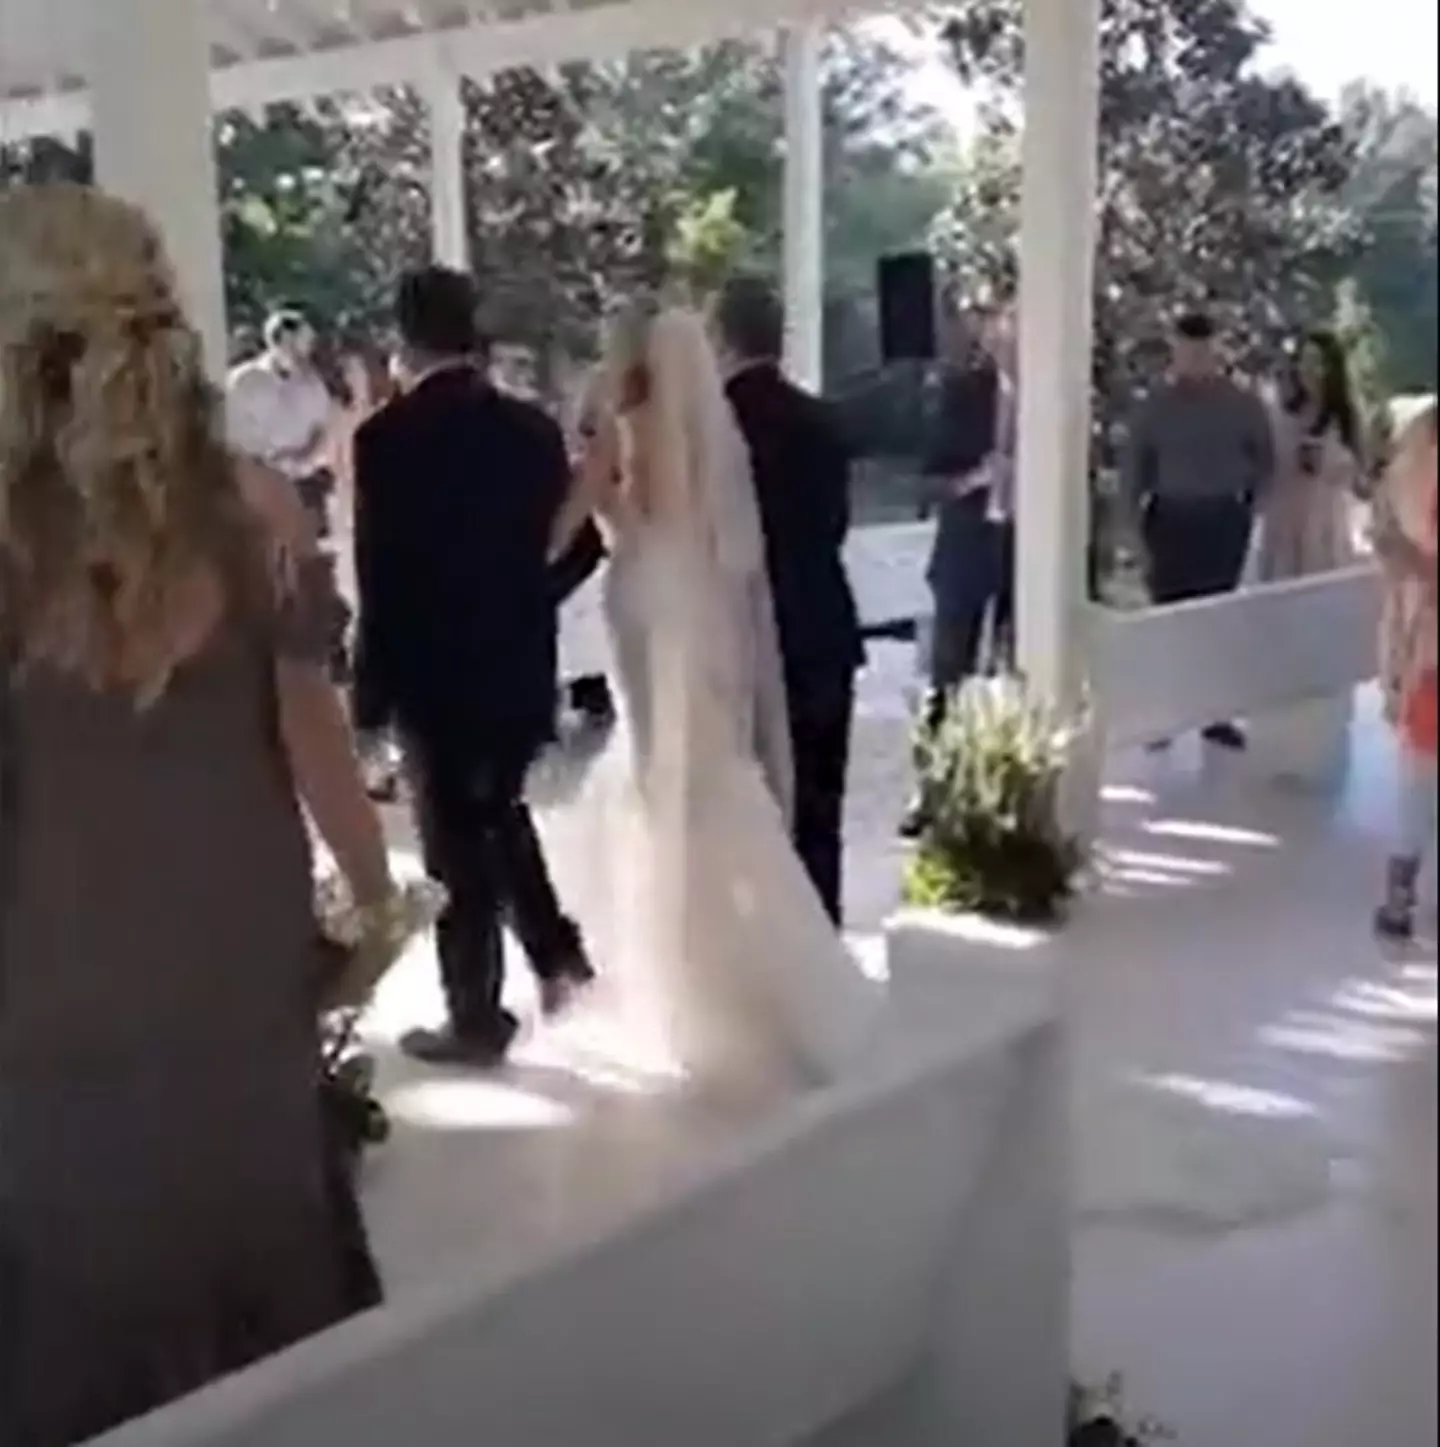 Both men walked the bride down the aisle at her wedding.